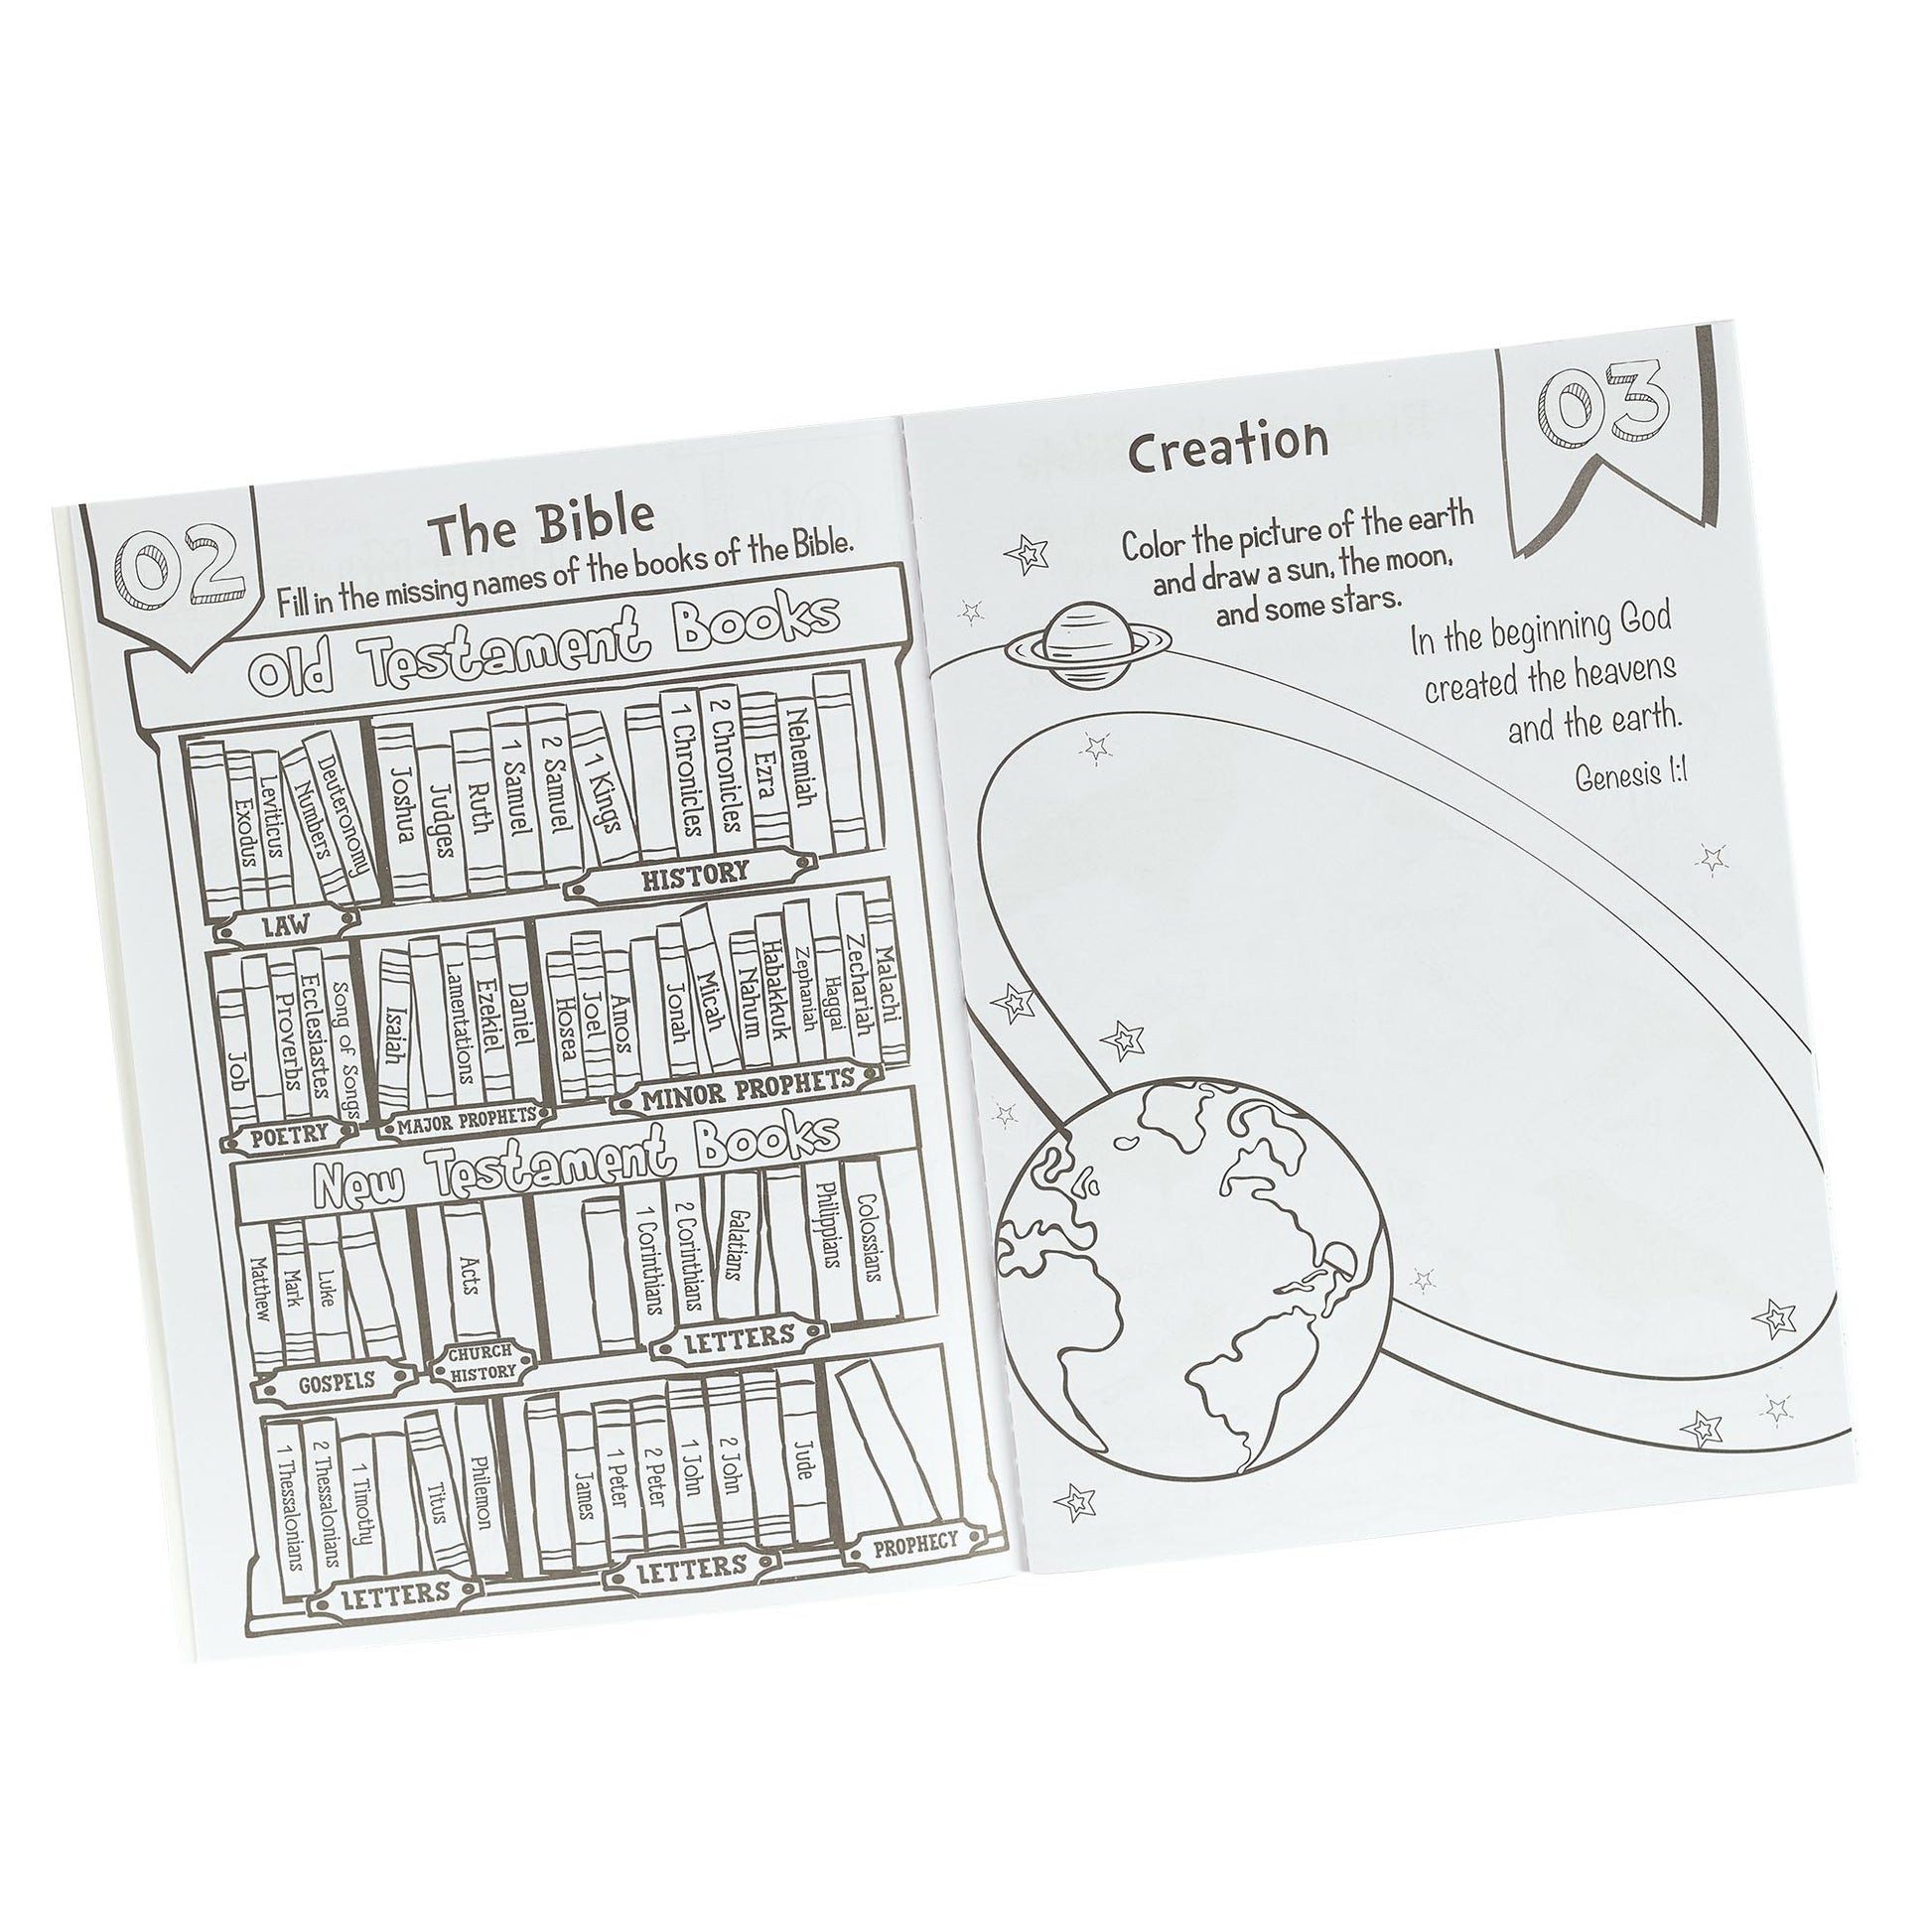 77 Bible Activities for Kids - The Christian Gift Company